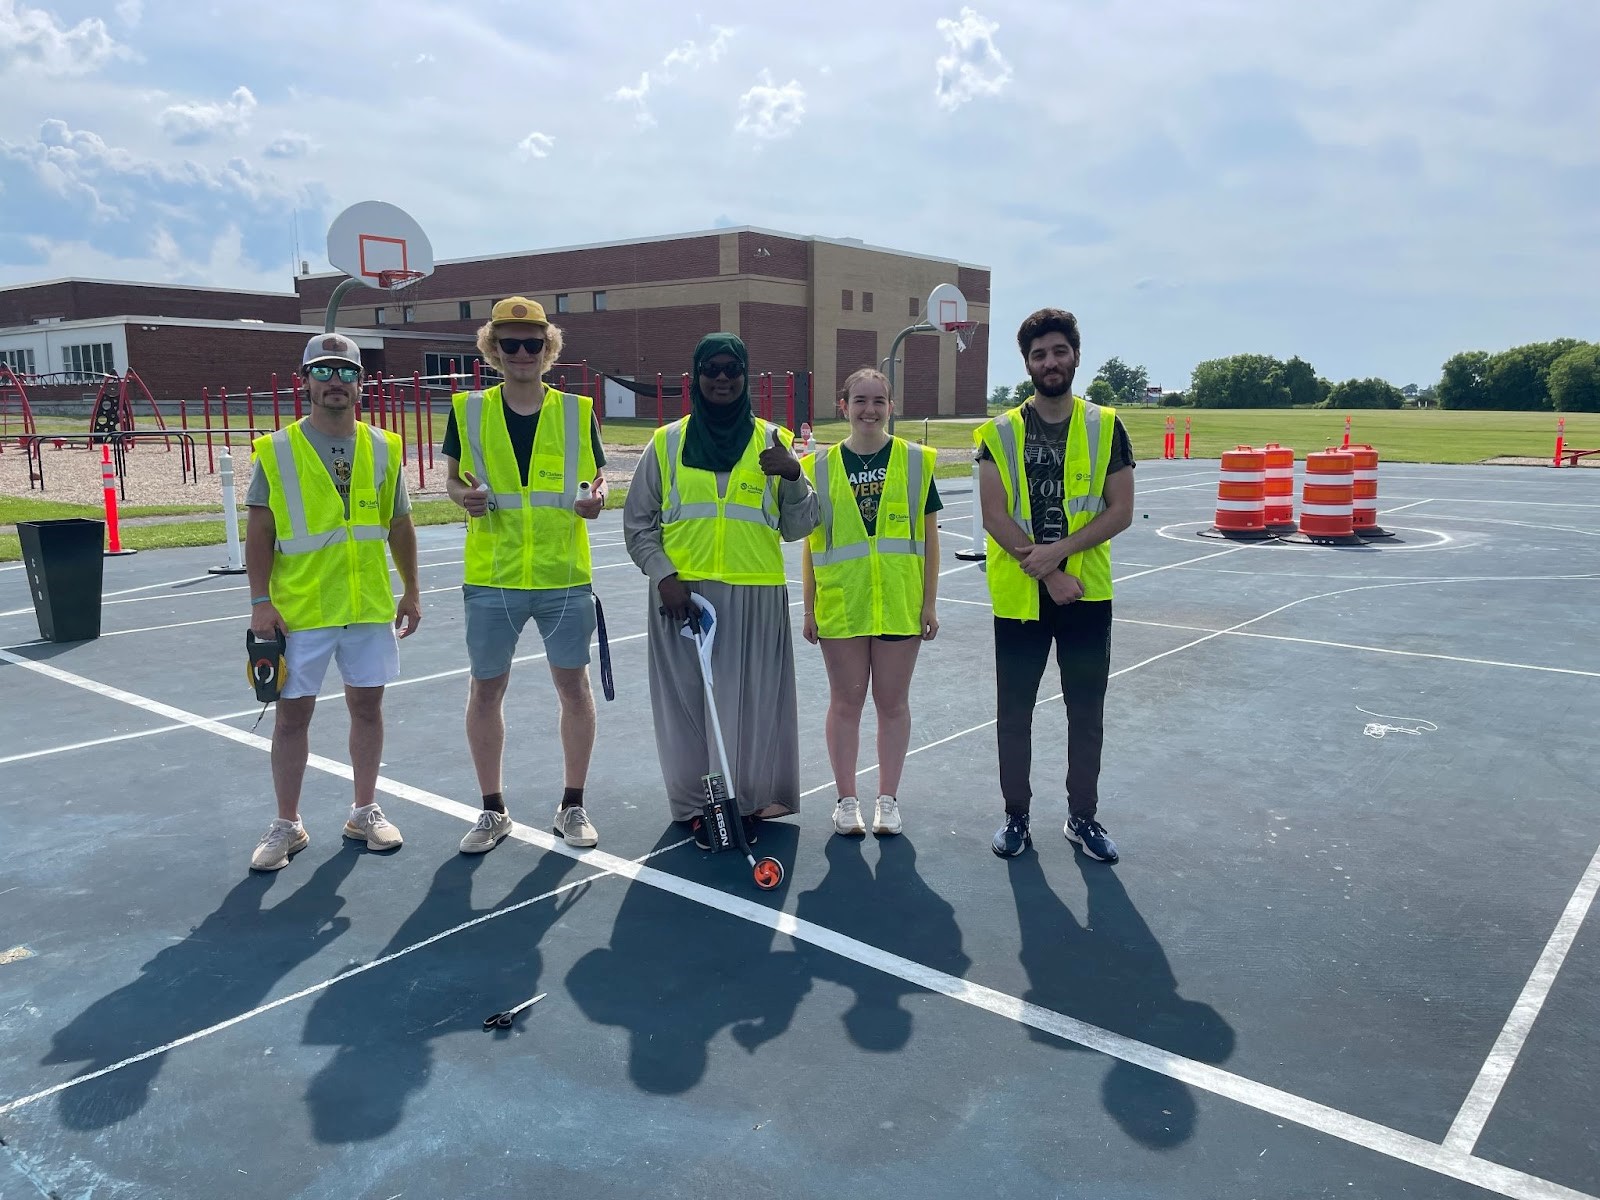 Five students pose for a photo in high-visibility vests on an outdoor basketball court with various traffic cones in the background